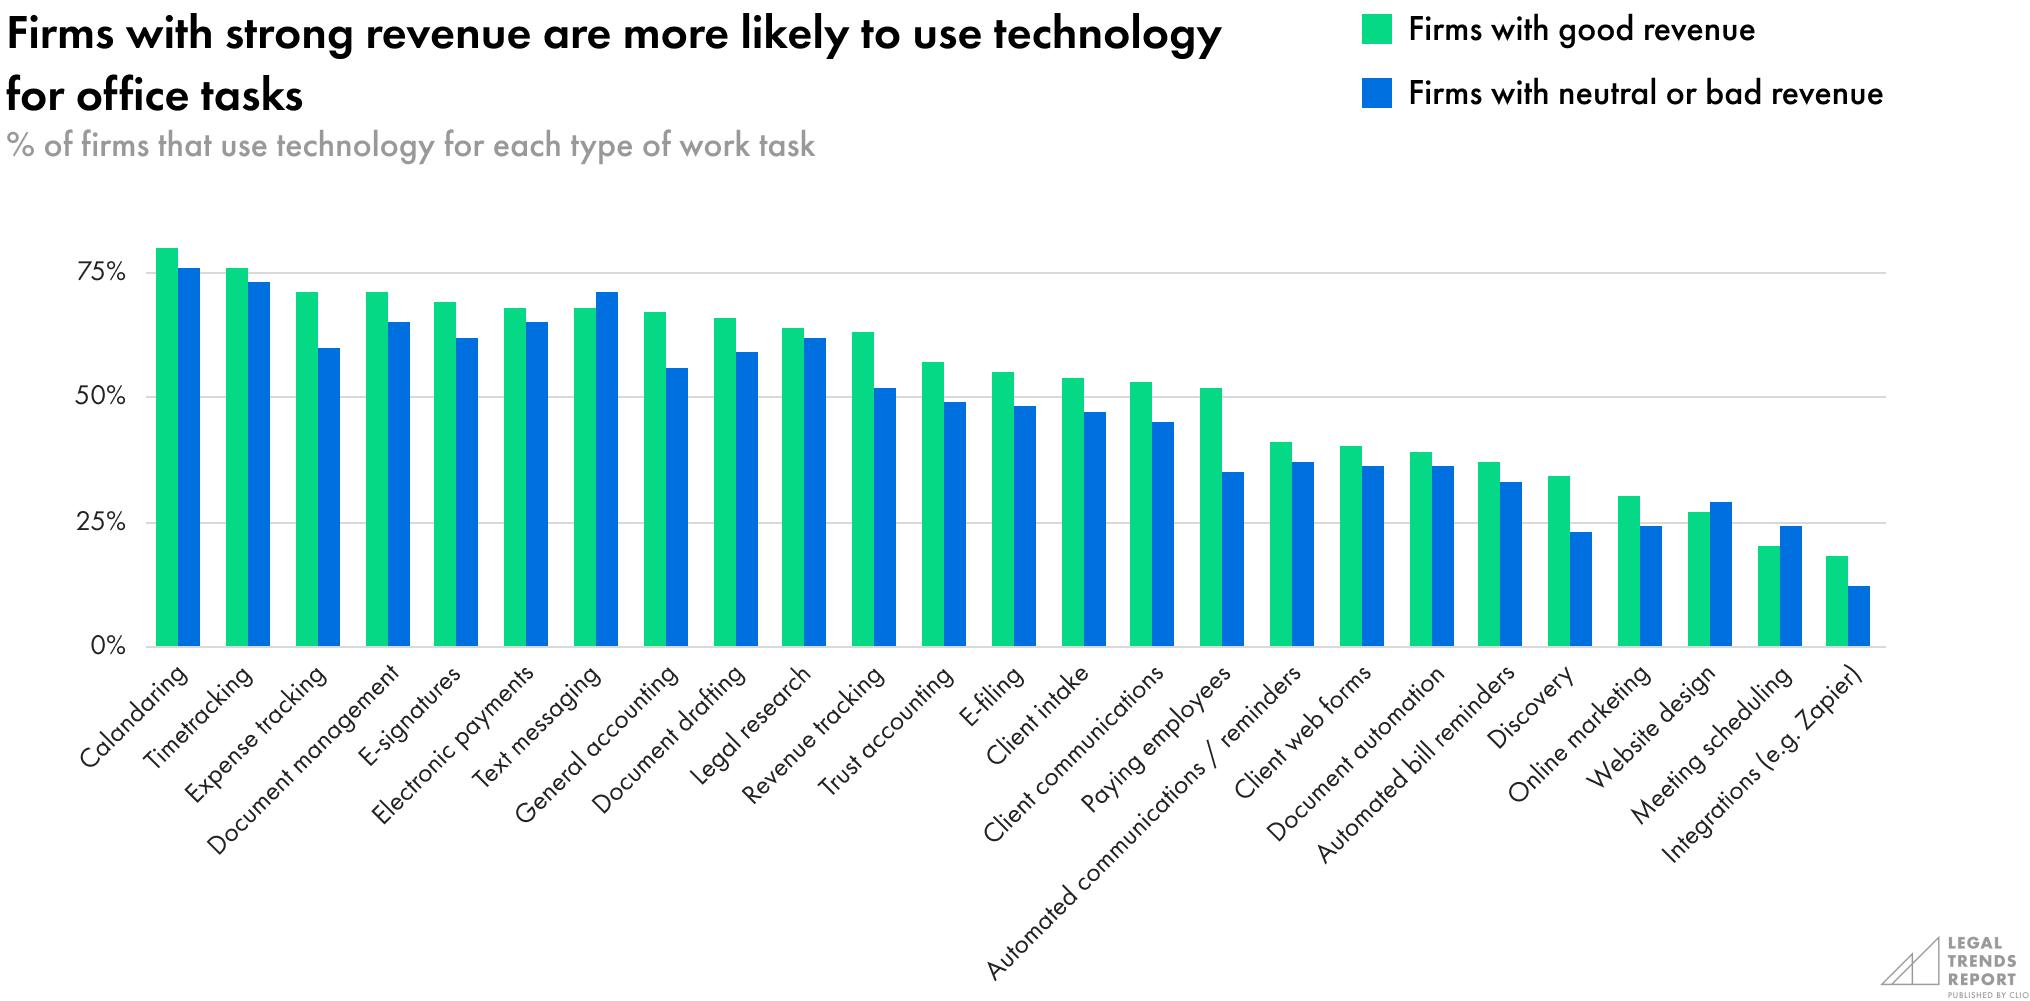 Firms with strong revenue are more likely to use technology for office tasks